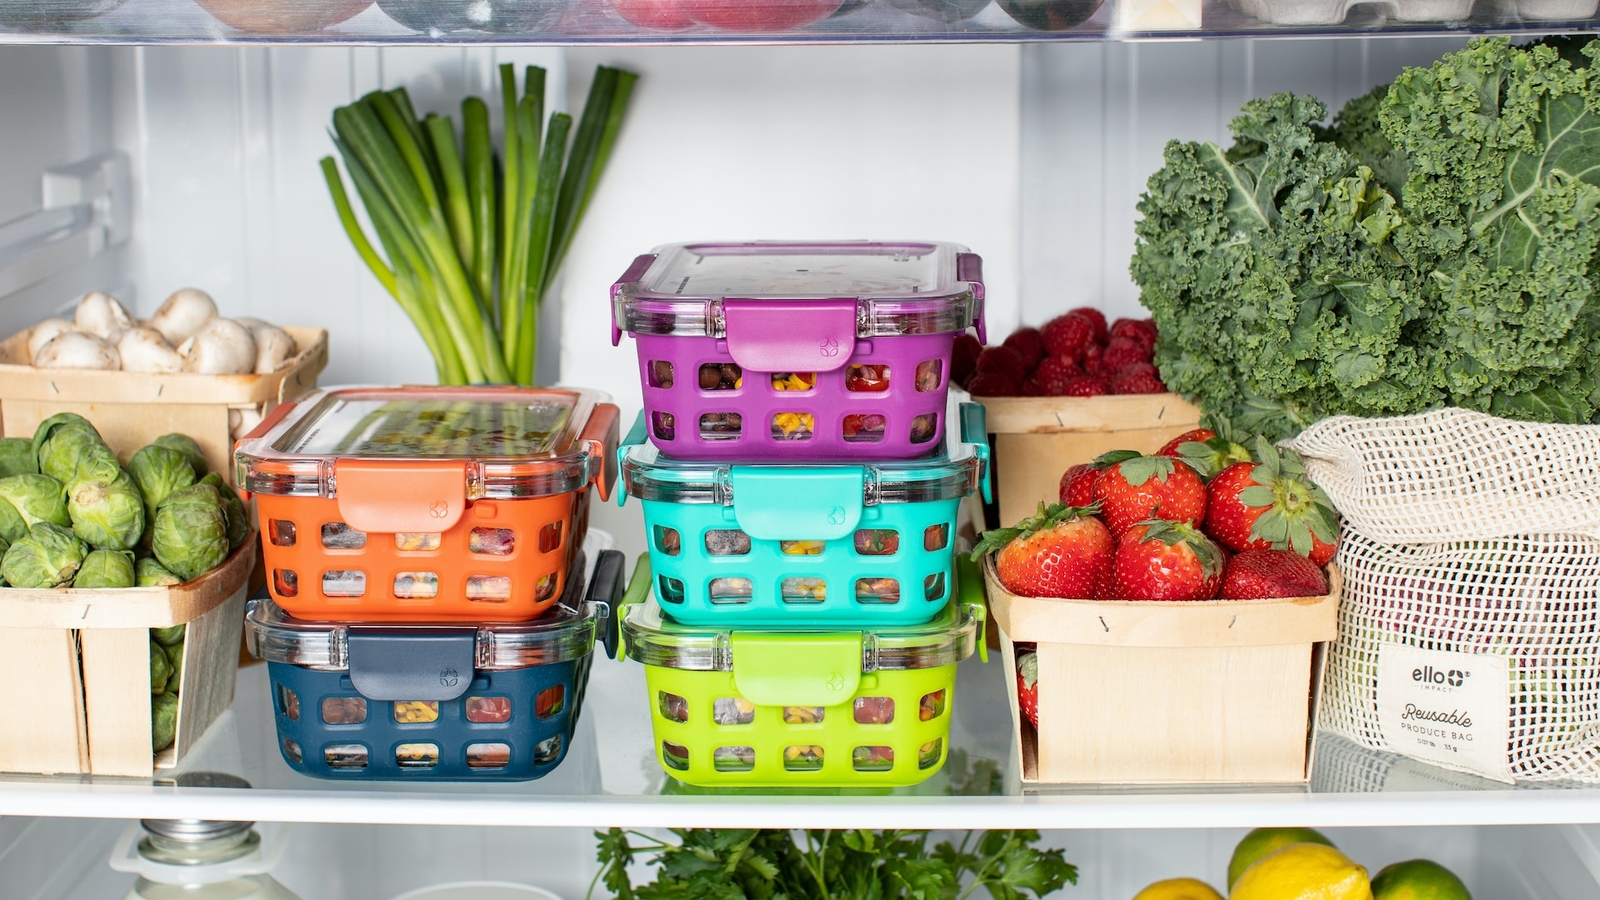 A well-organized refrigerator interior with colorful, stacked food storage containers, fresh fruits in wooden crates, and leafy greens.